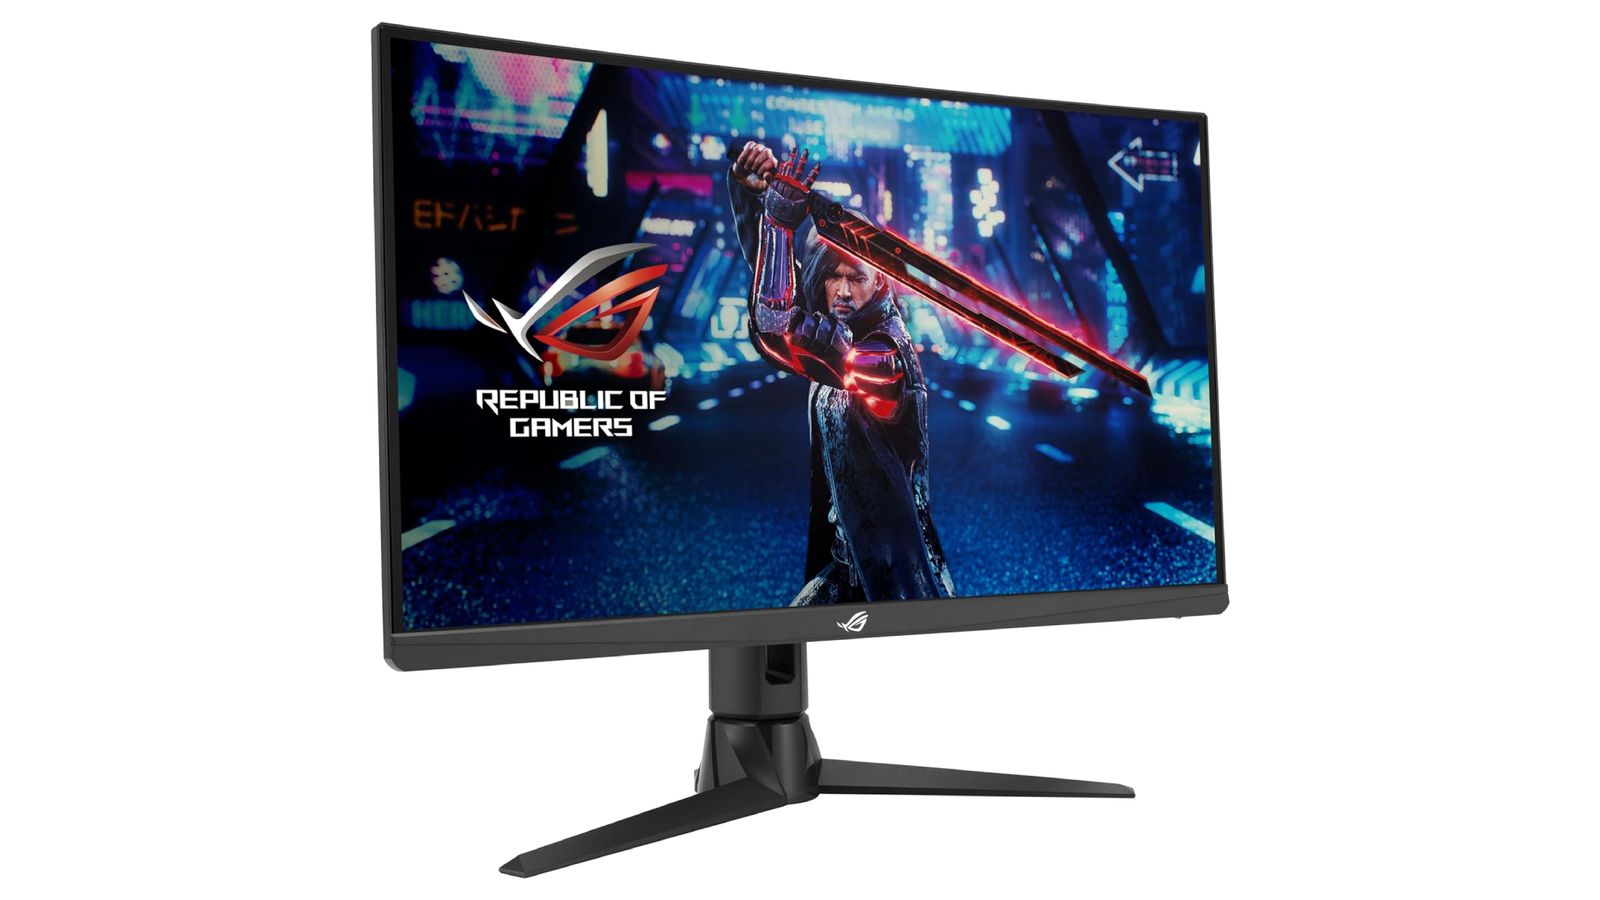 ASUS ROG Strix XG27AQV product image of a black monitor with a video game character holding a red flaming sword on the display next to ROG branding.